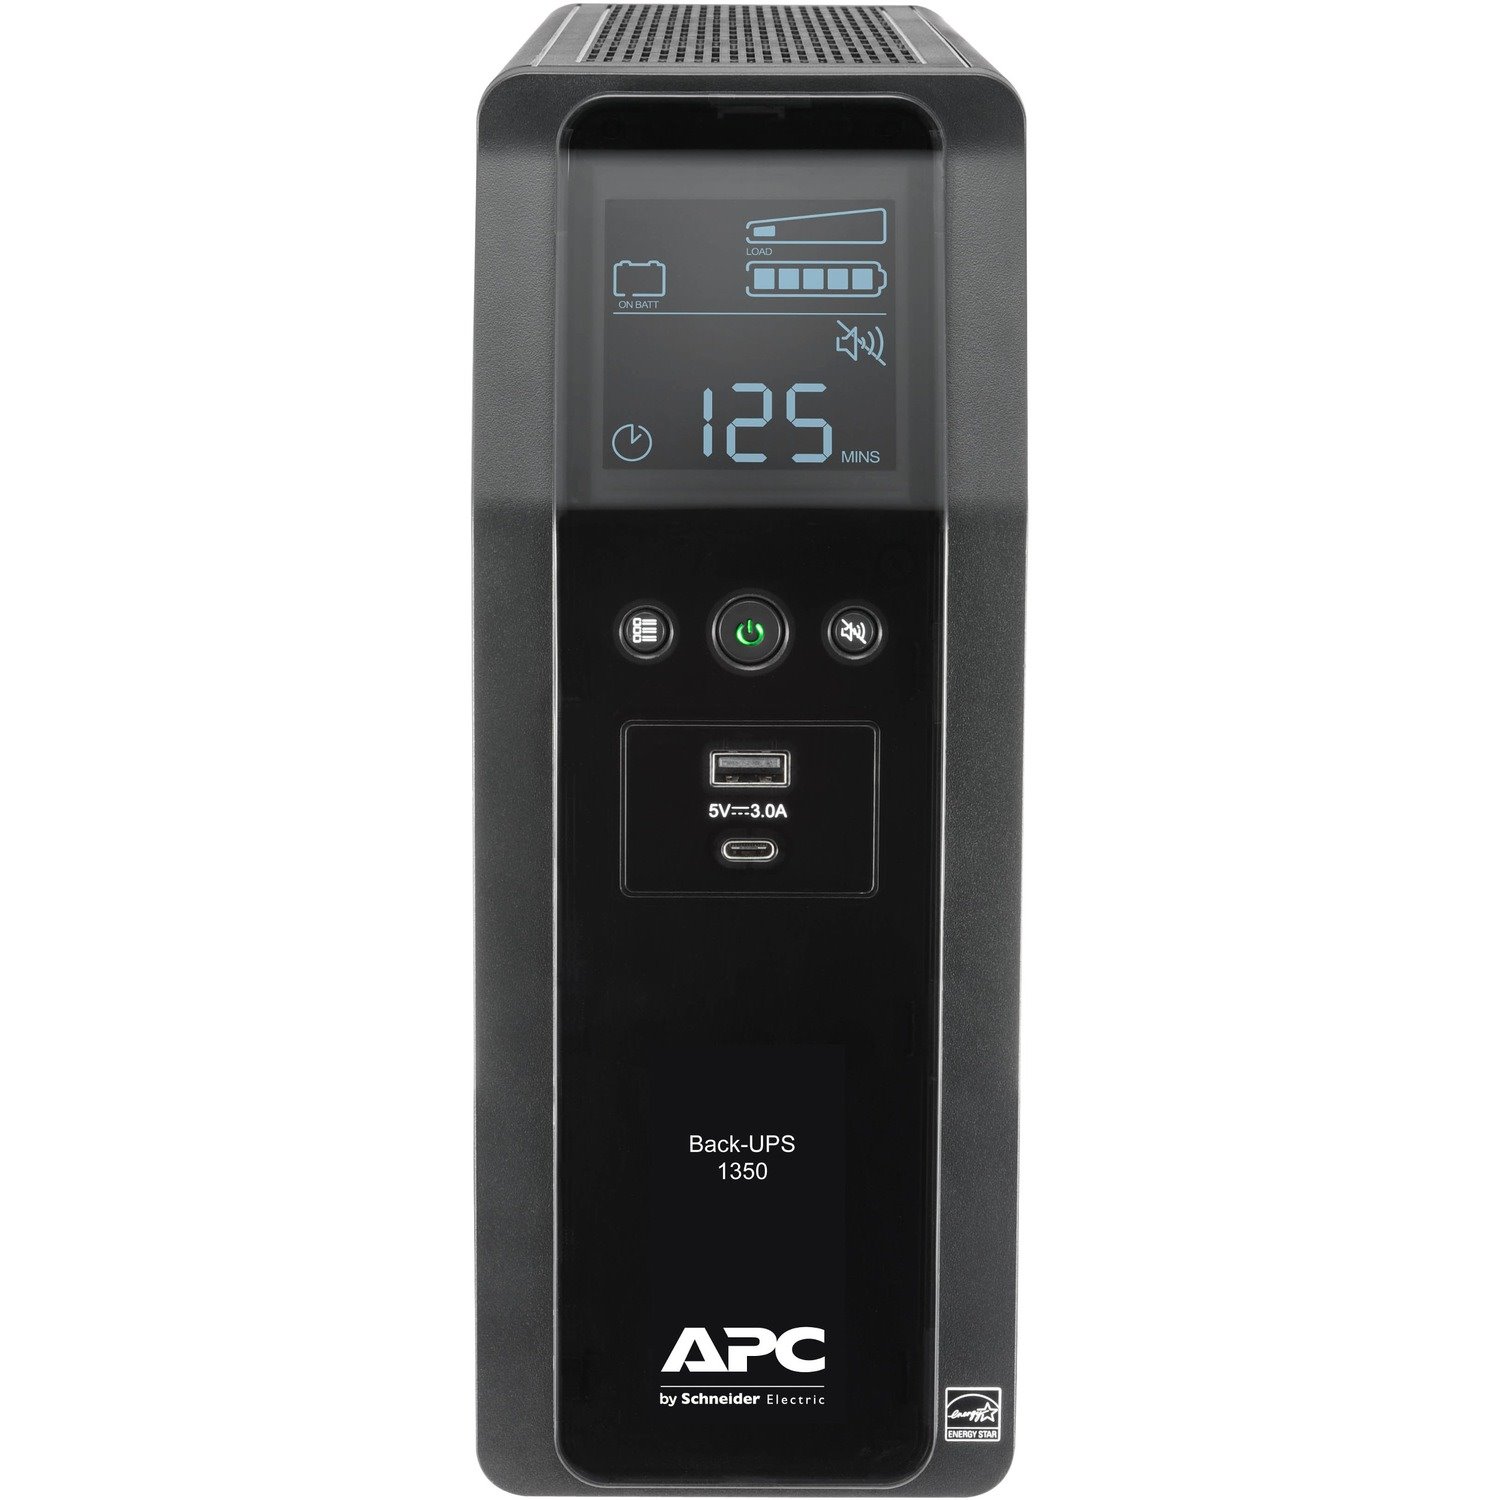 APC by Schneider Electric Back-UPS Pro BN 1350VA, 10 Outlets, 2 USB Charging Ports, AVR, LCD Interface